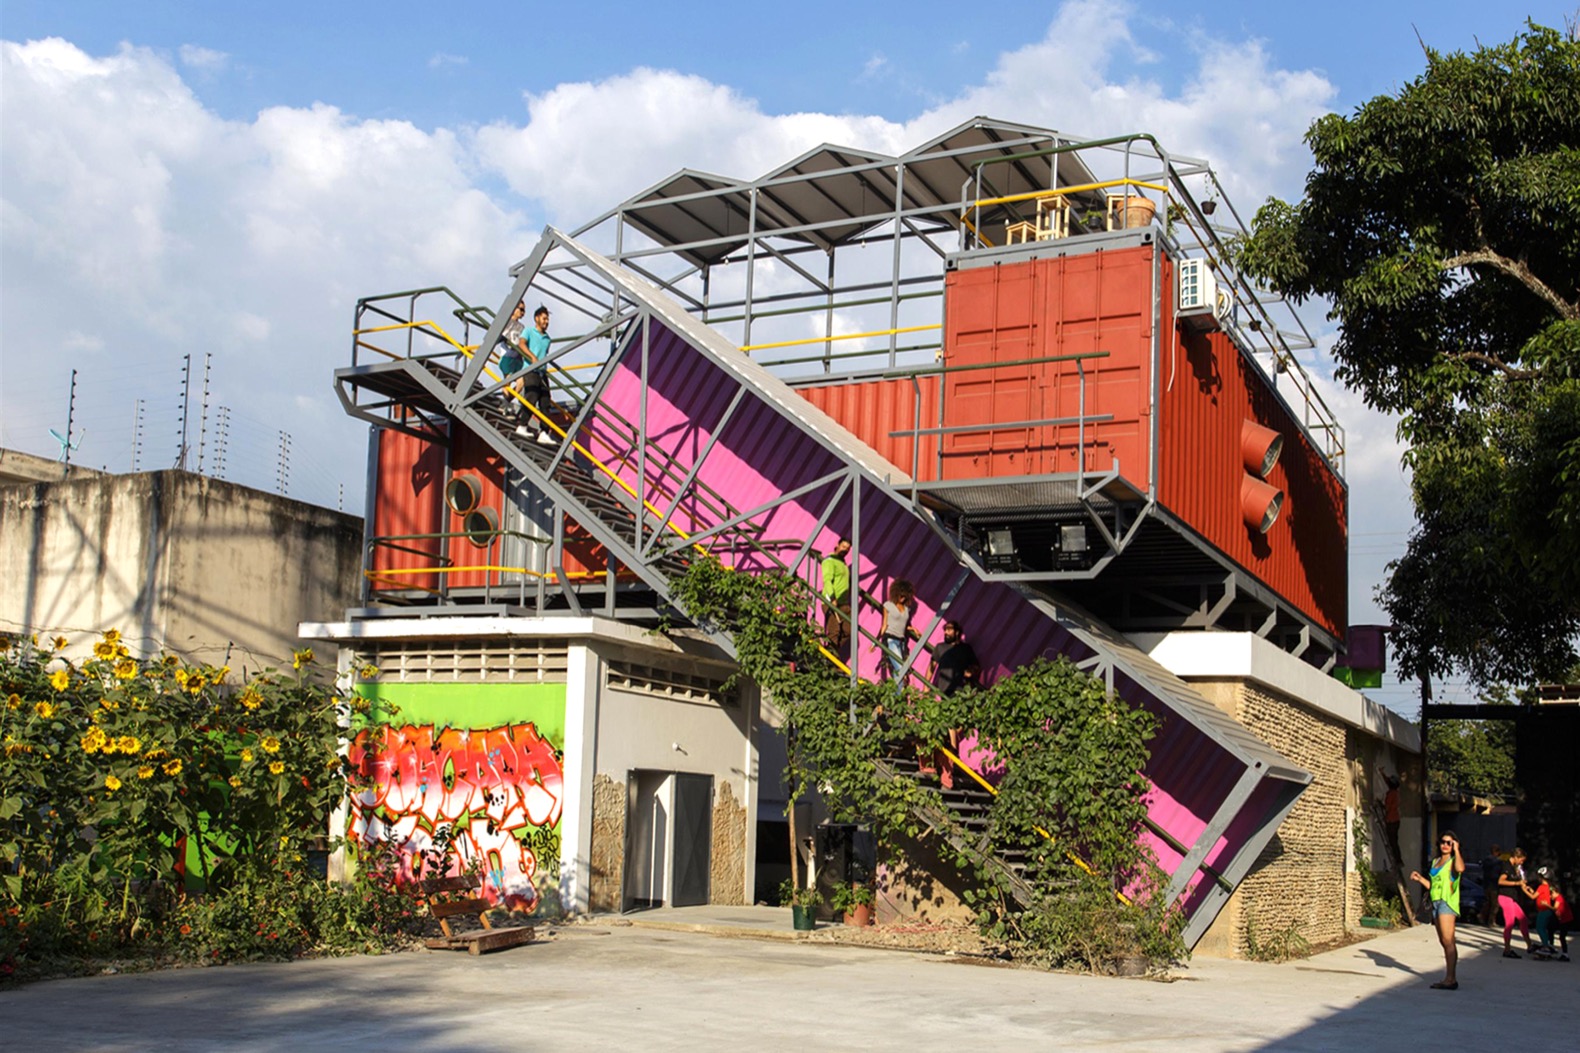 Colorful shipping container building with stairs and graffiti.